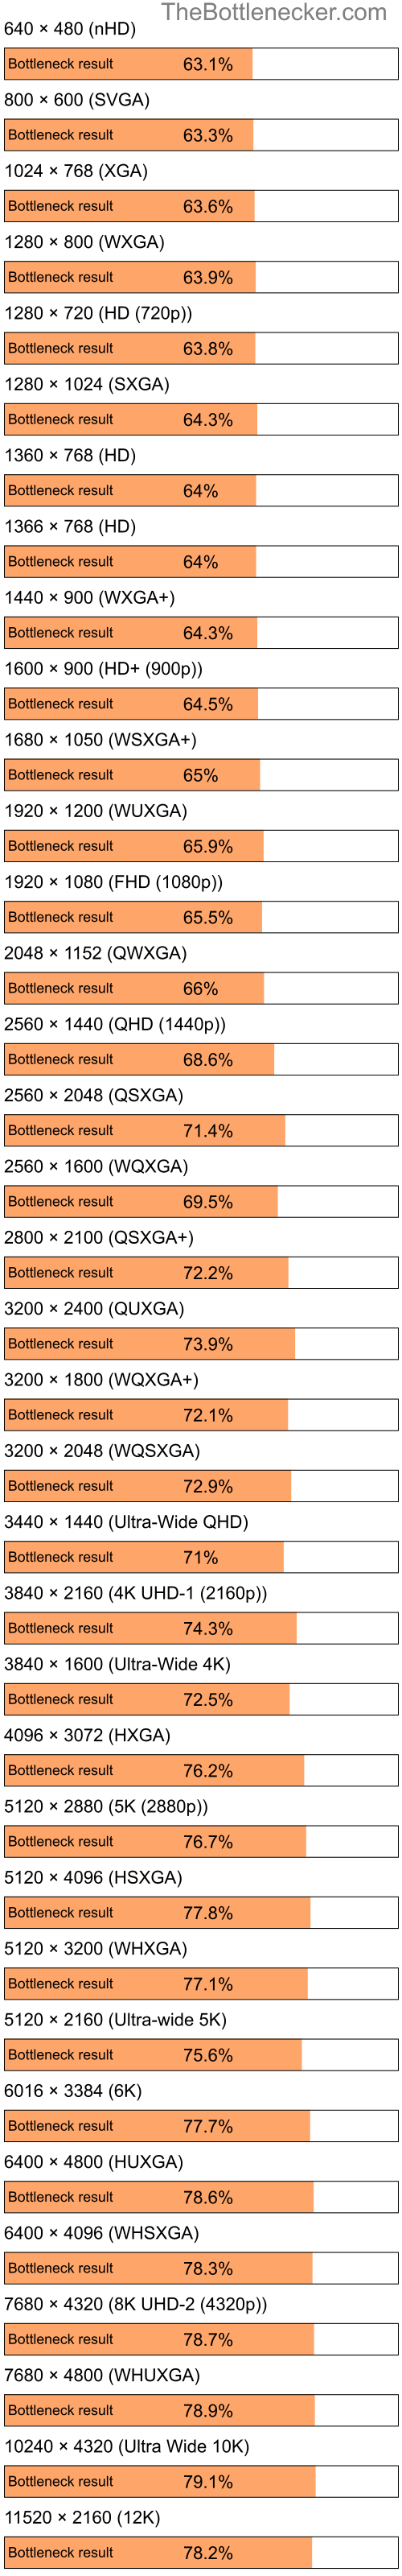 Bottleneck results by resolution for Intel Celeron and AMD M860G with Mobility Radeon 4100 in General Tasks